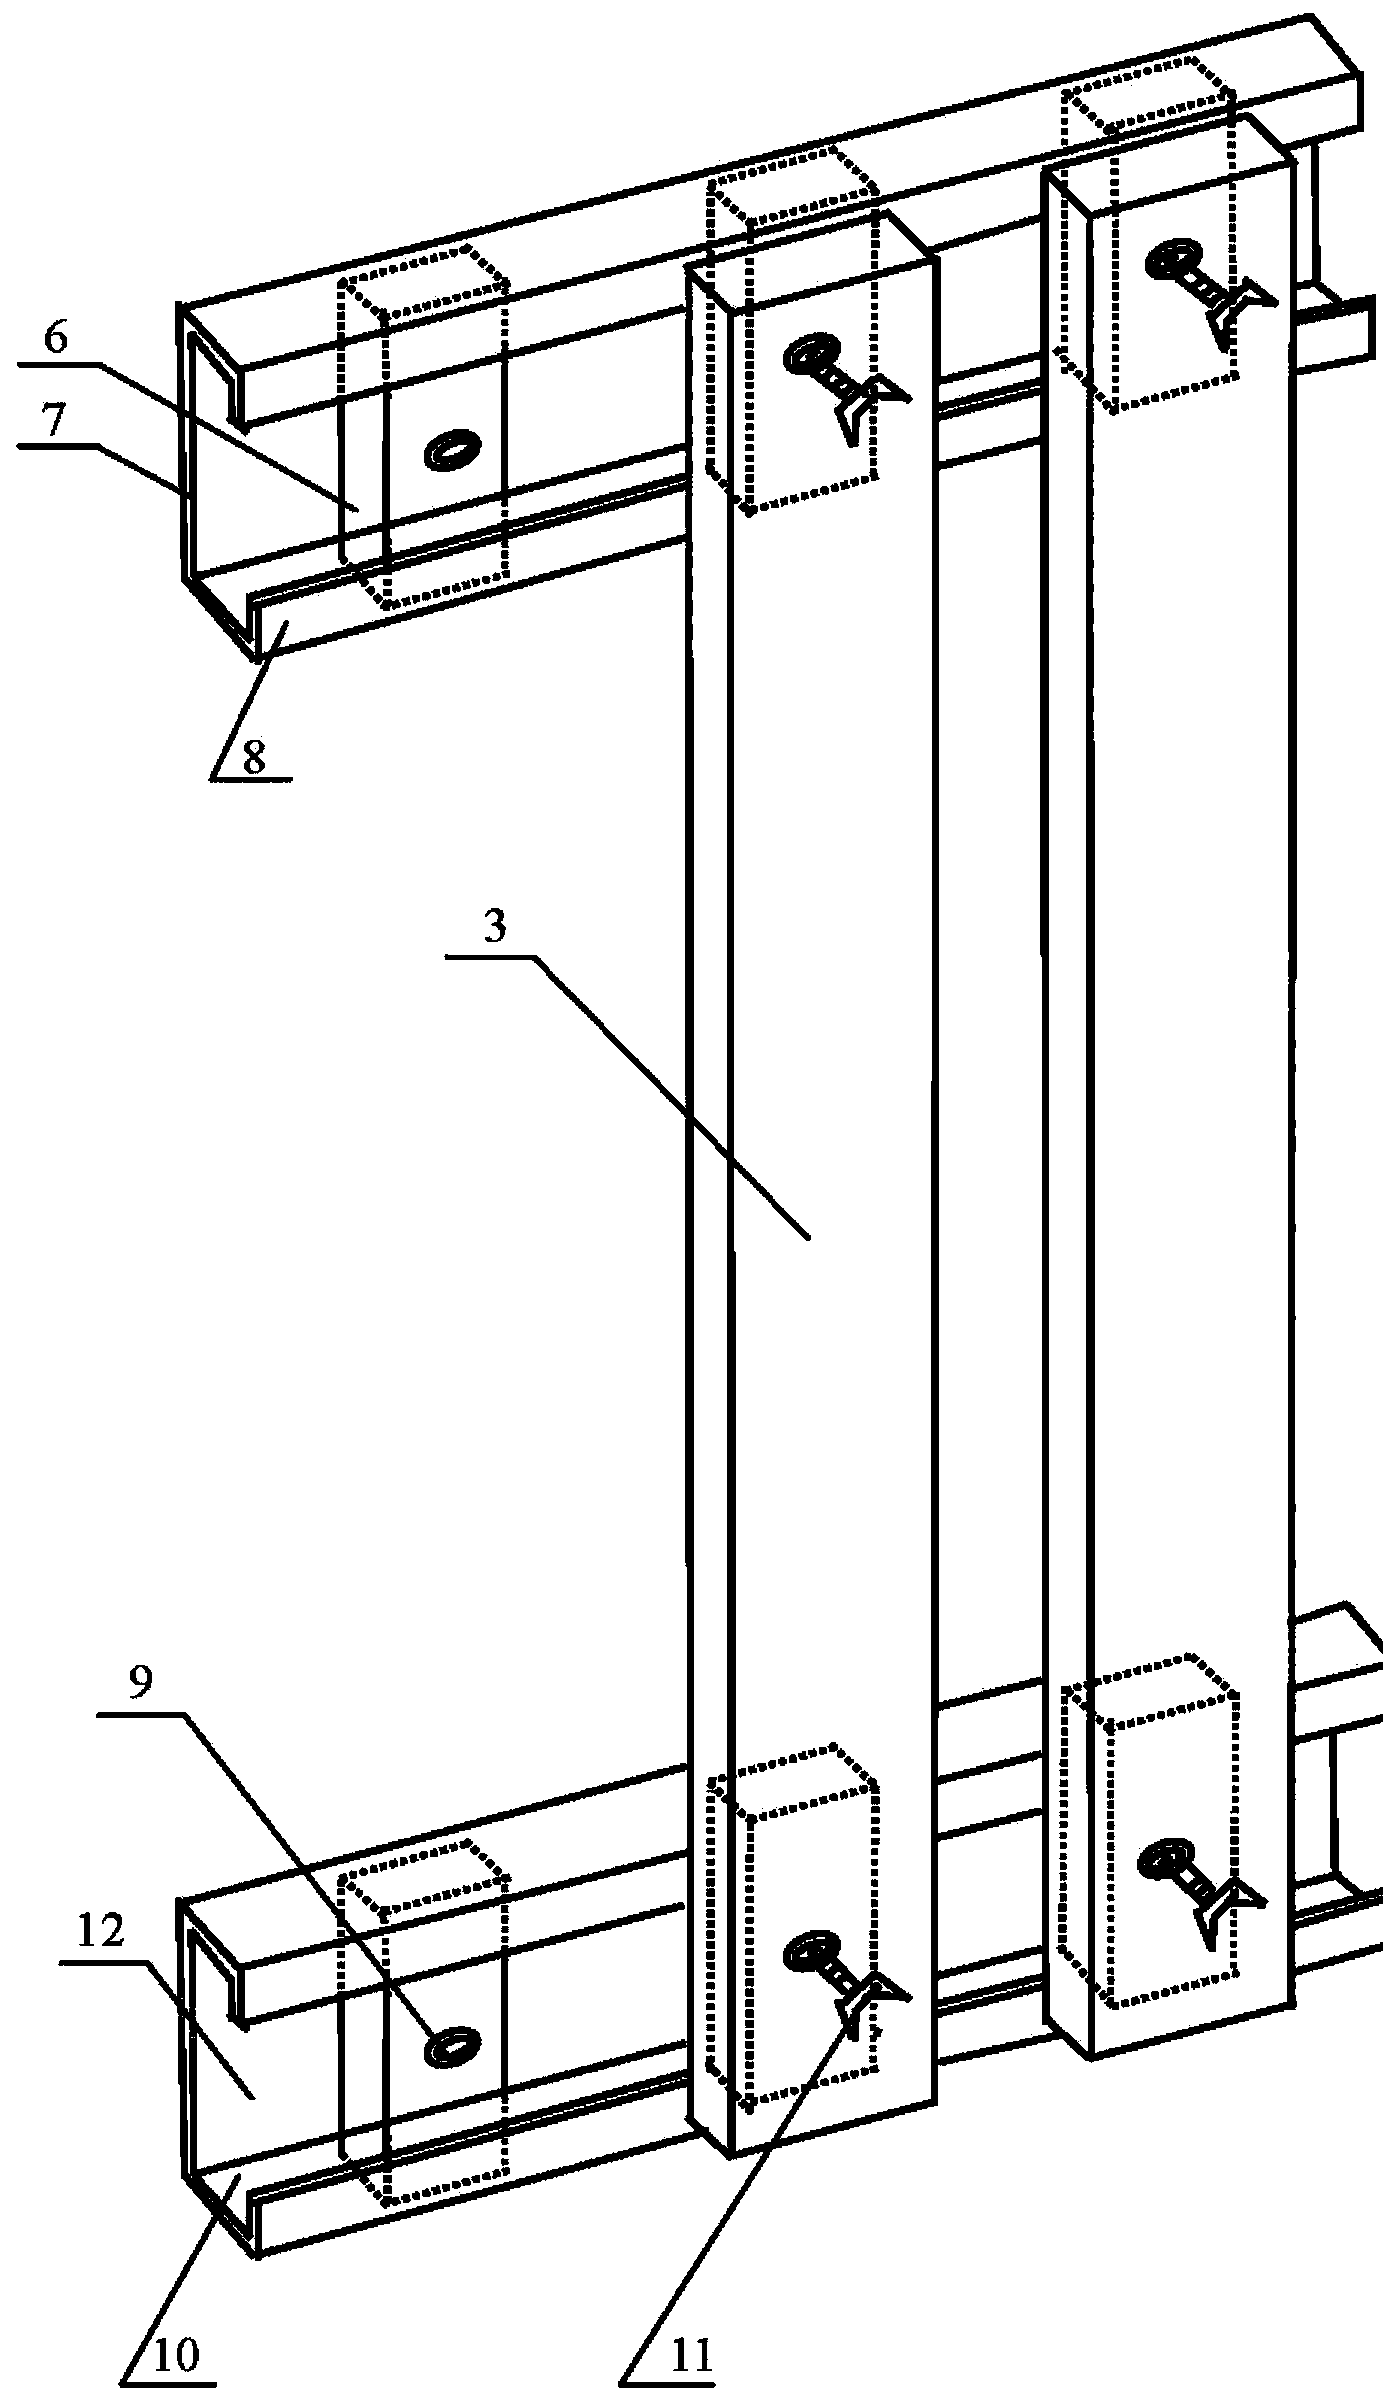 Fry classifying device